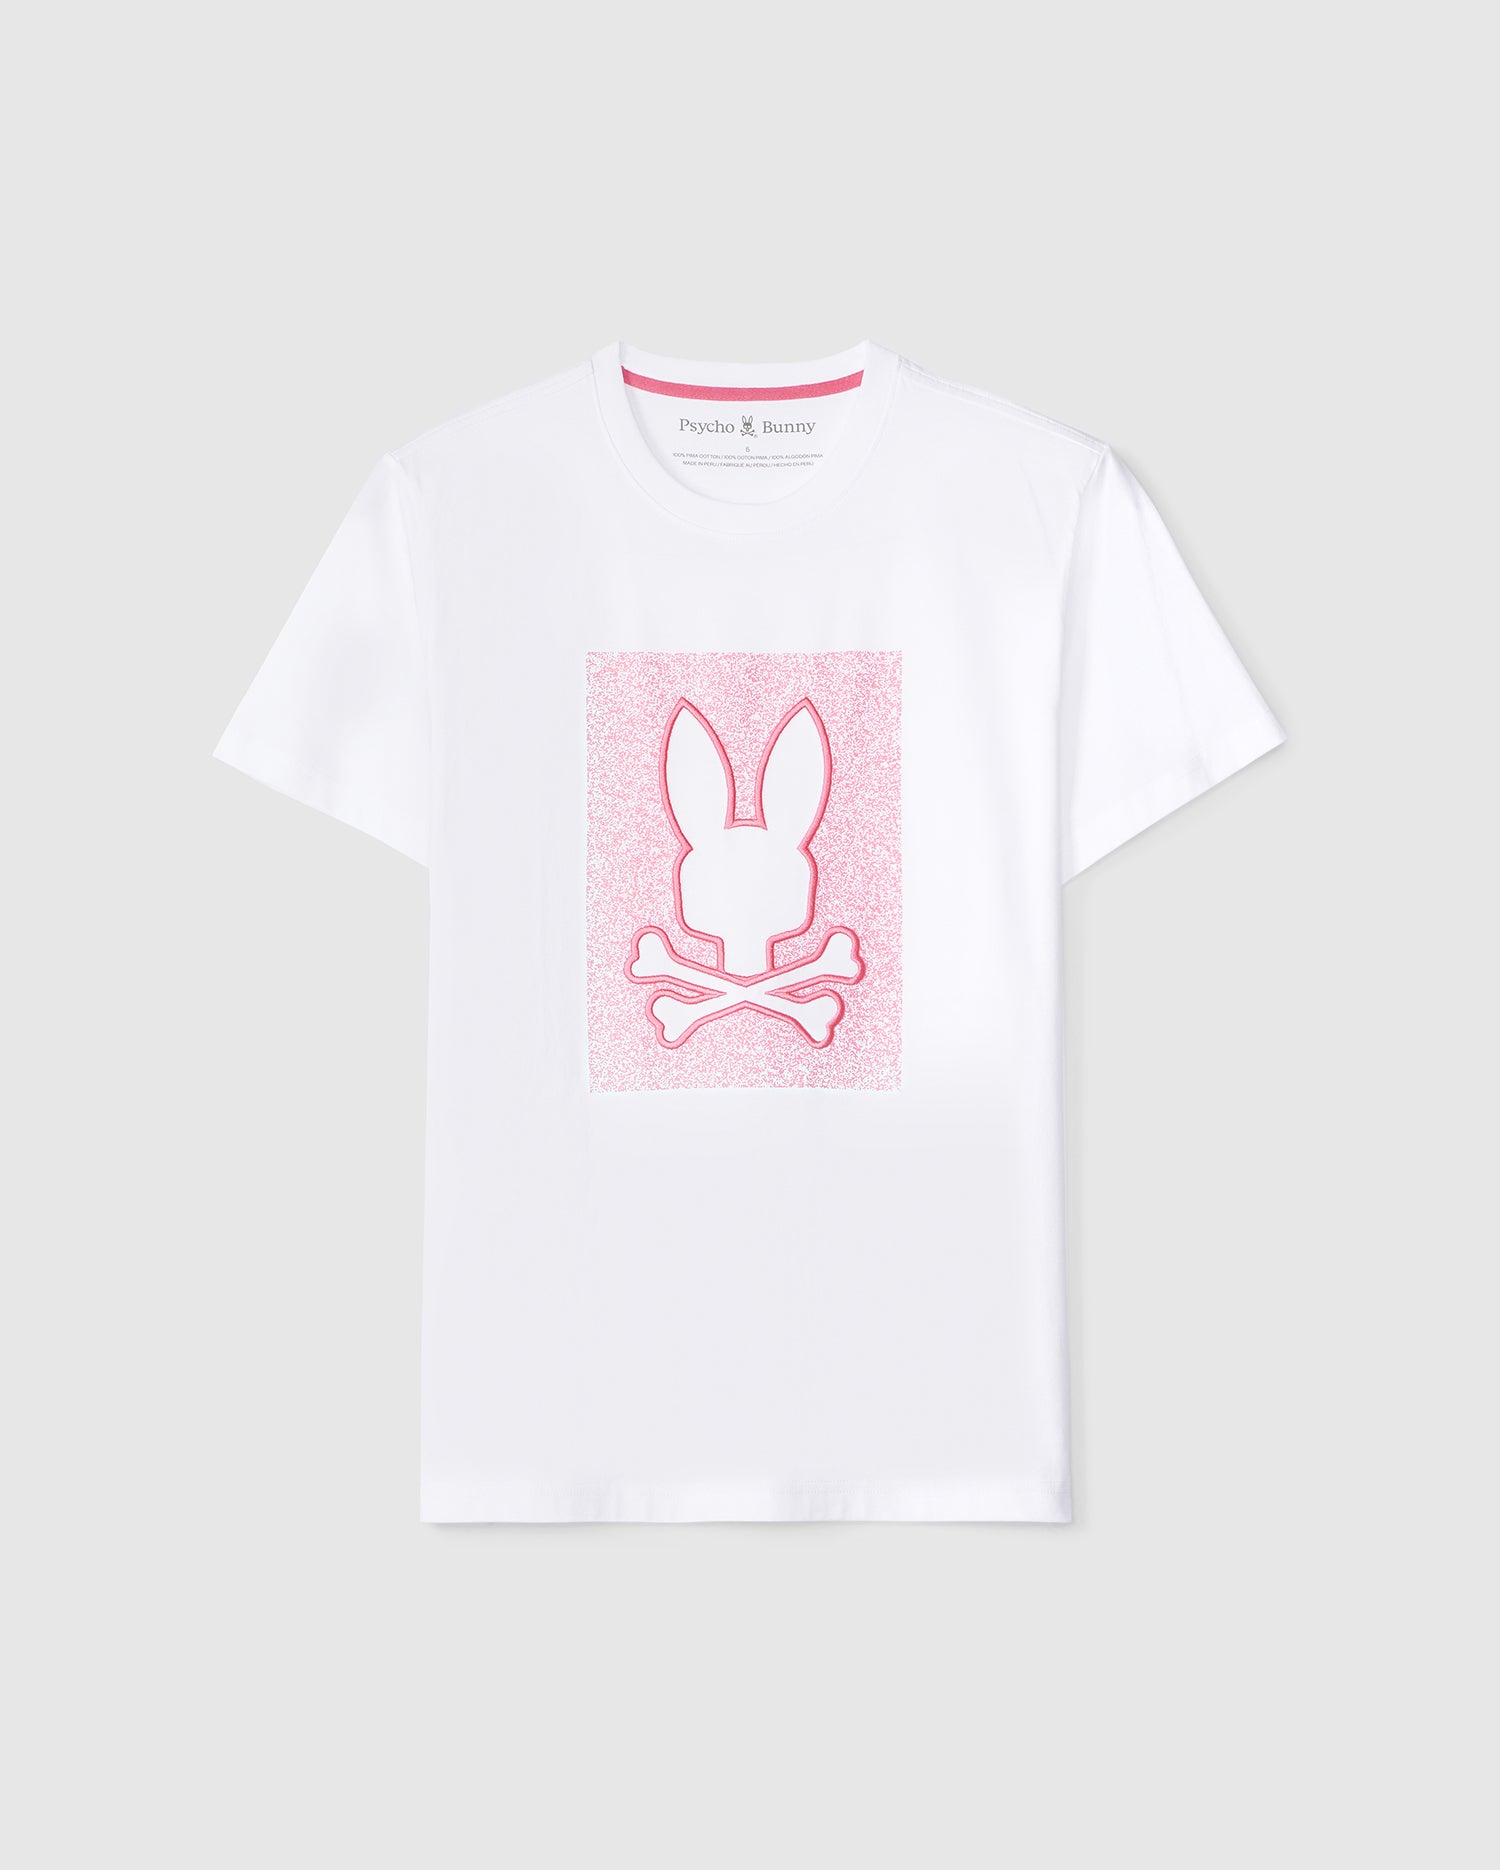 White MENS LIVINGSTON GRAPHIC TEE crafted from Peruvian Pima cotton, featuring a pink psychedelic background square with an embroidered Bunny design sitting above crossed bones. The shirt has a label 